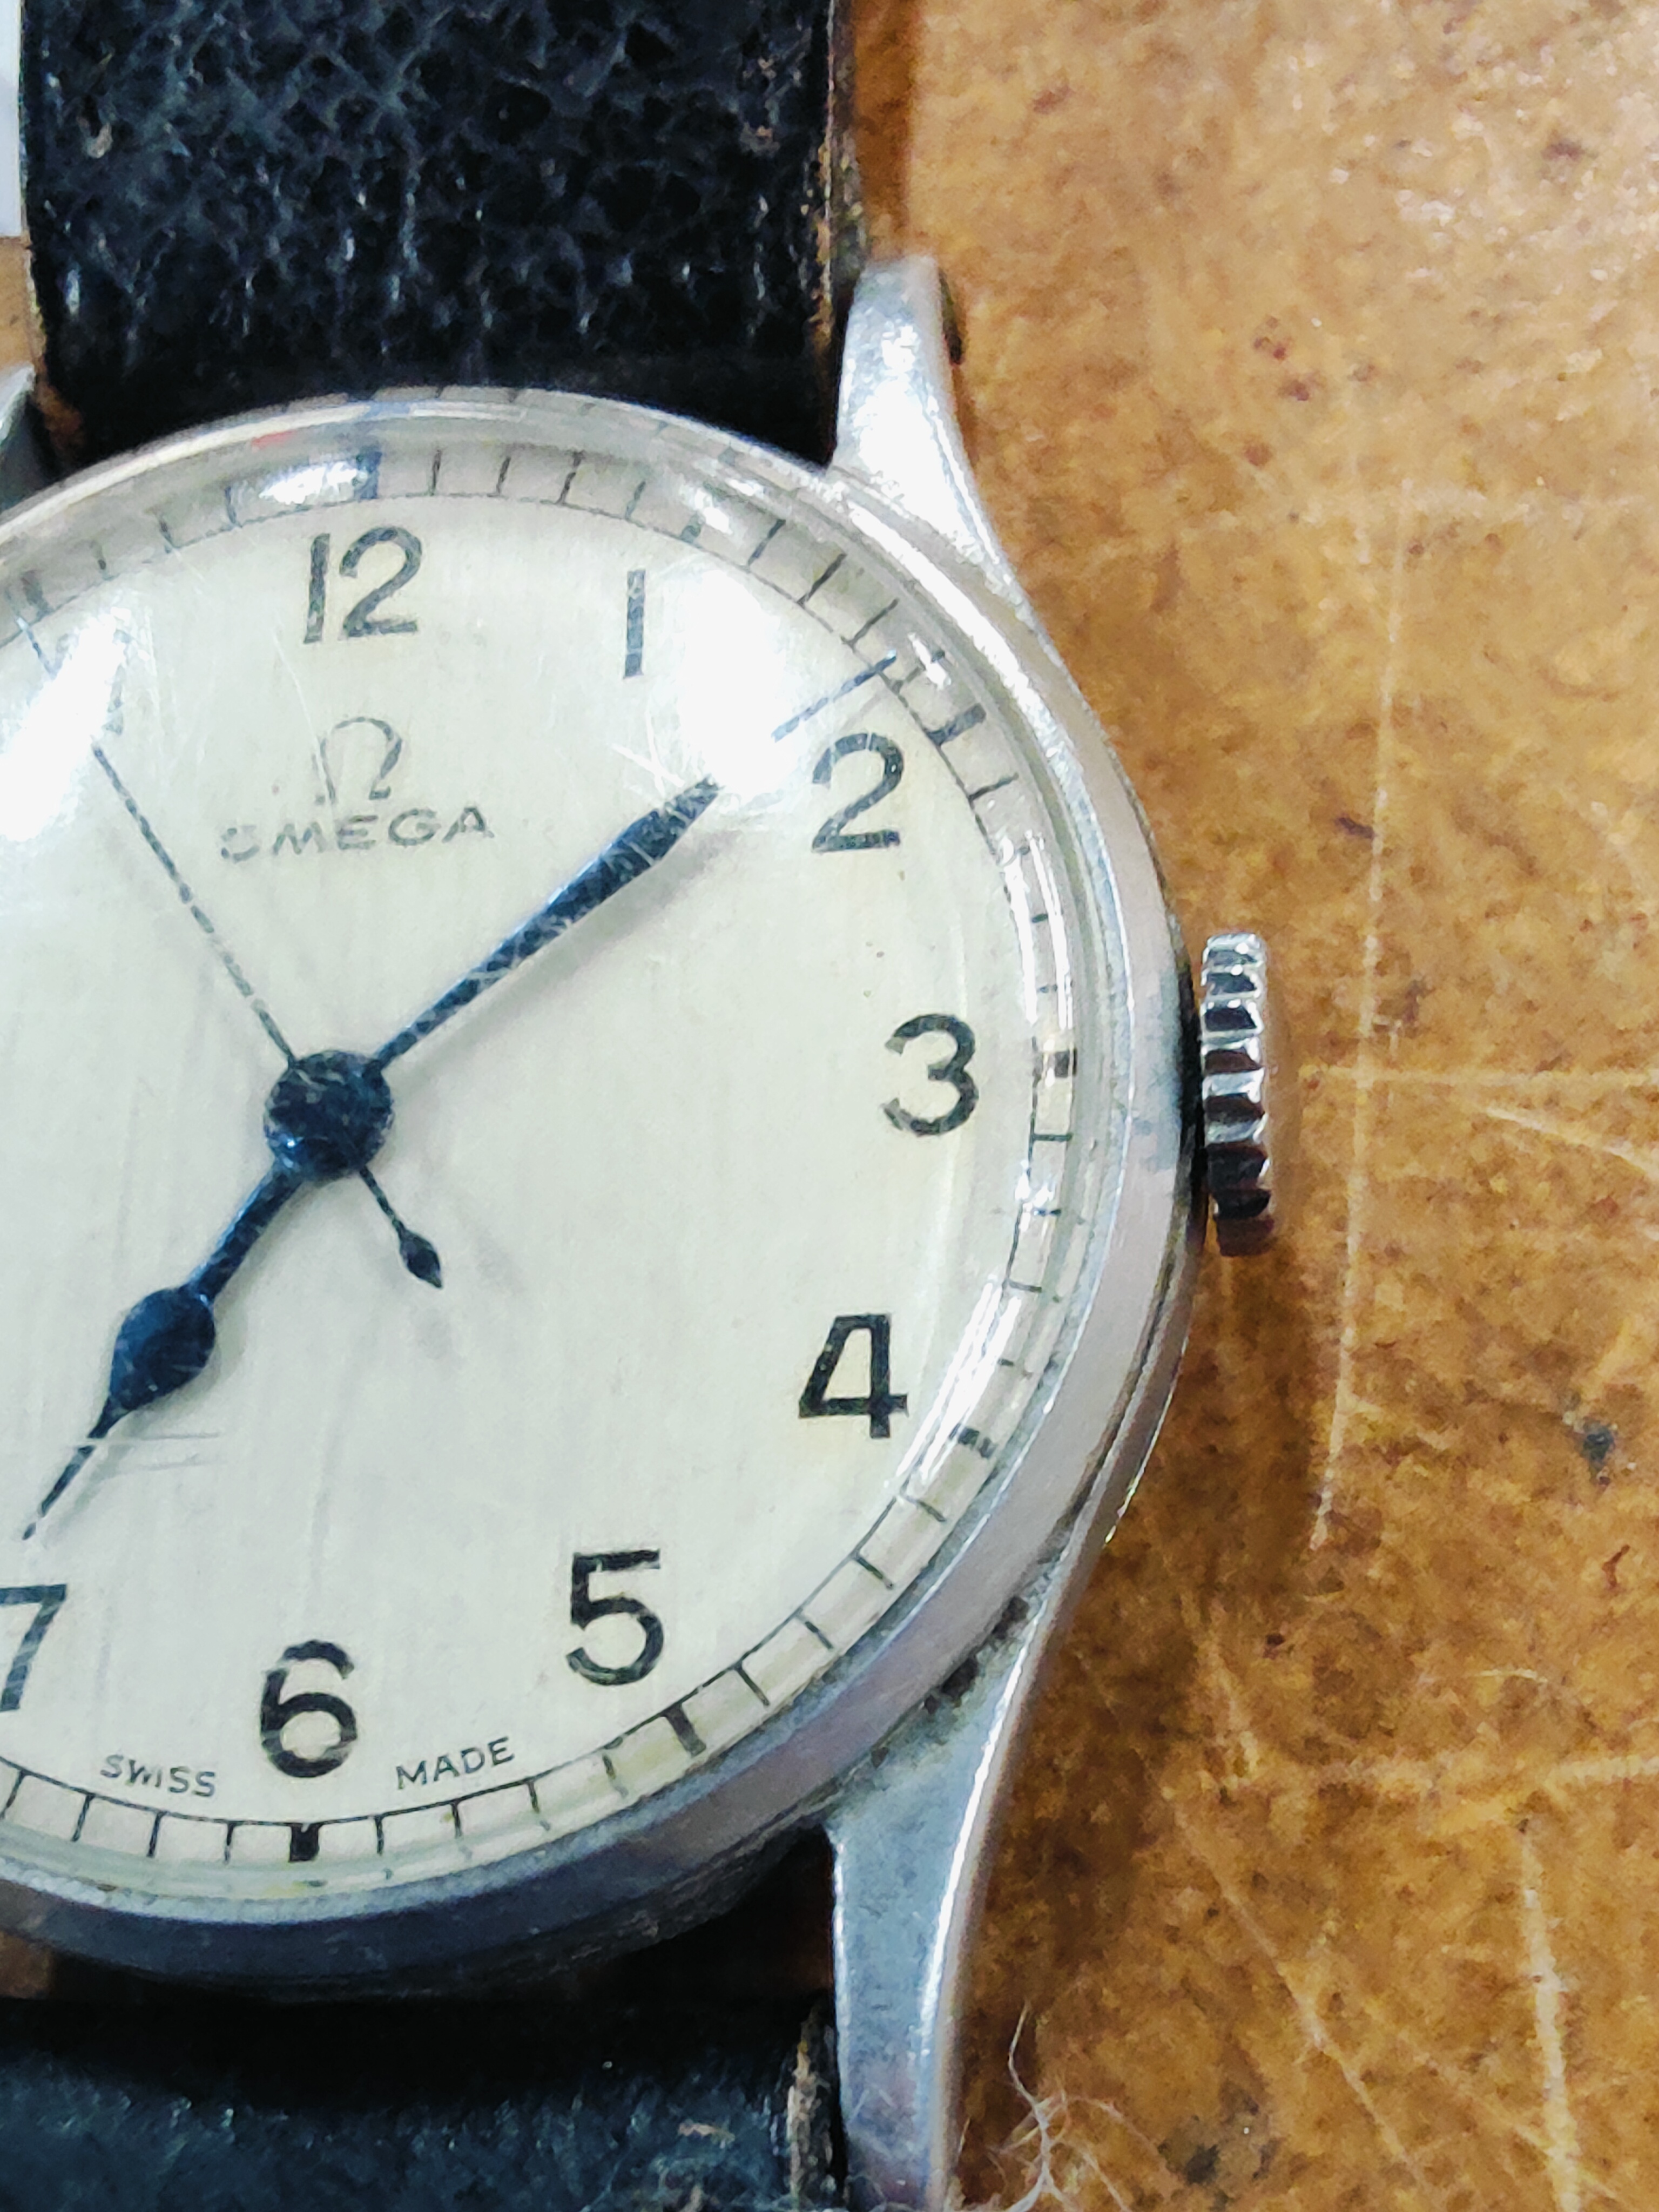 VINTAGE MILITARY OMEGA WRISTWATCH - Image 4 of 5